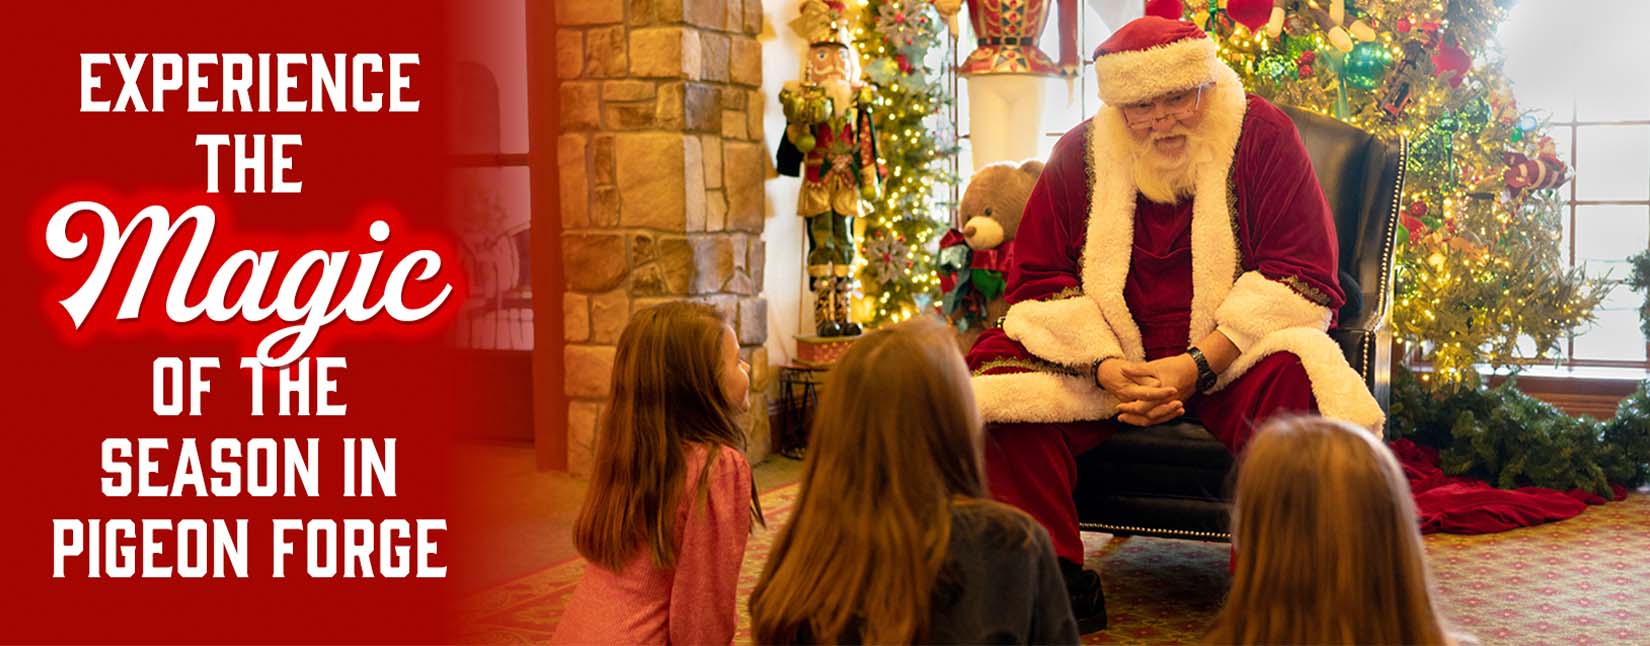 Experience the Magic of the season in Pigeon Forge